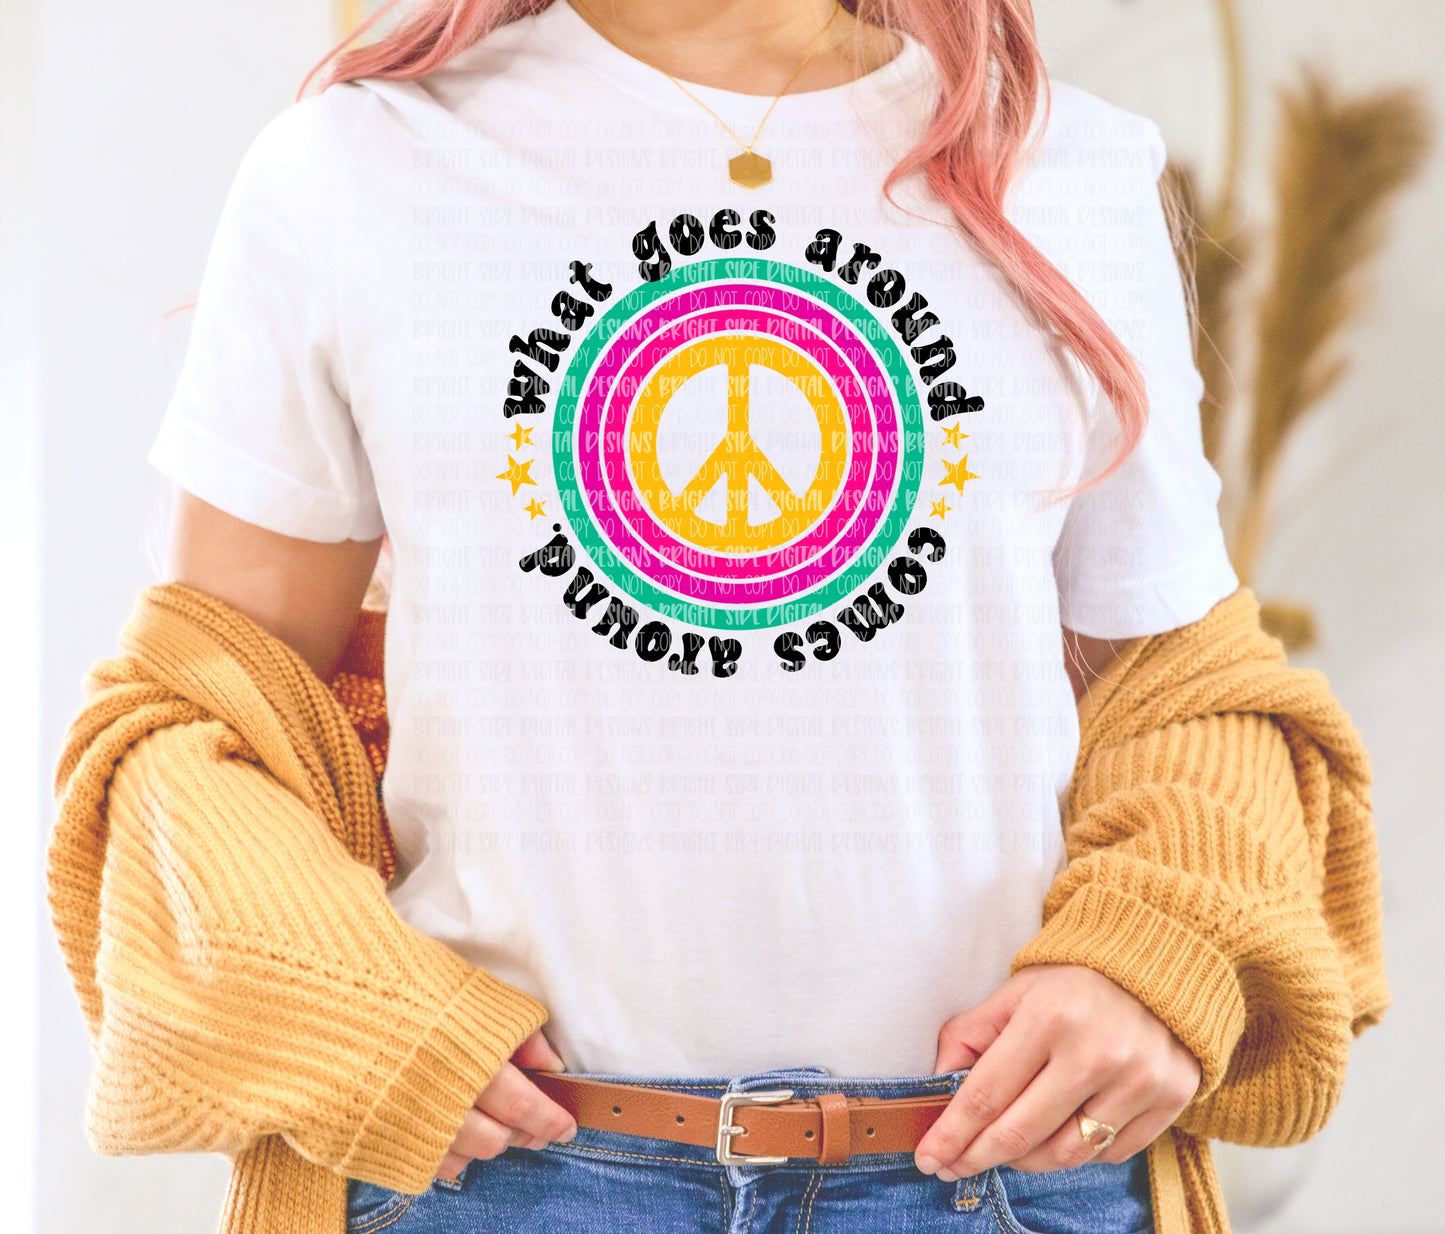 What goes around comes around (peace sign)